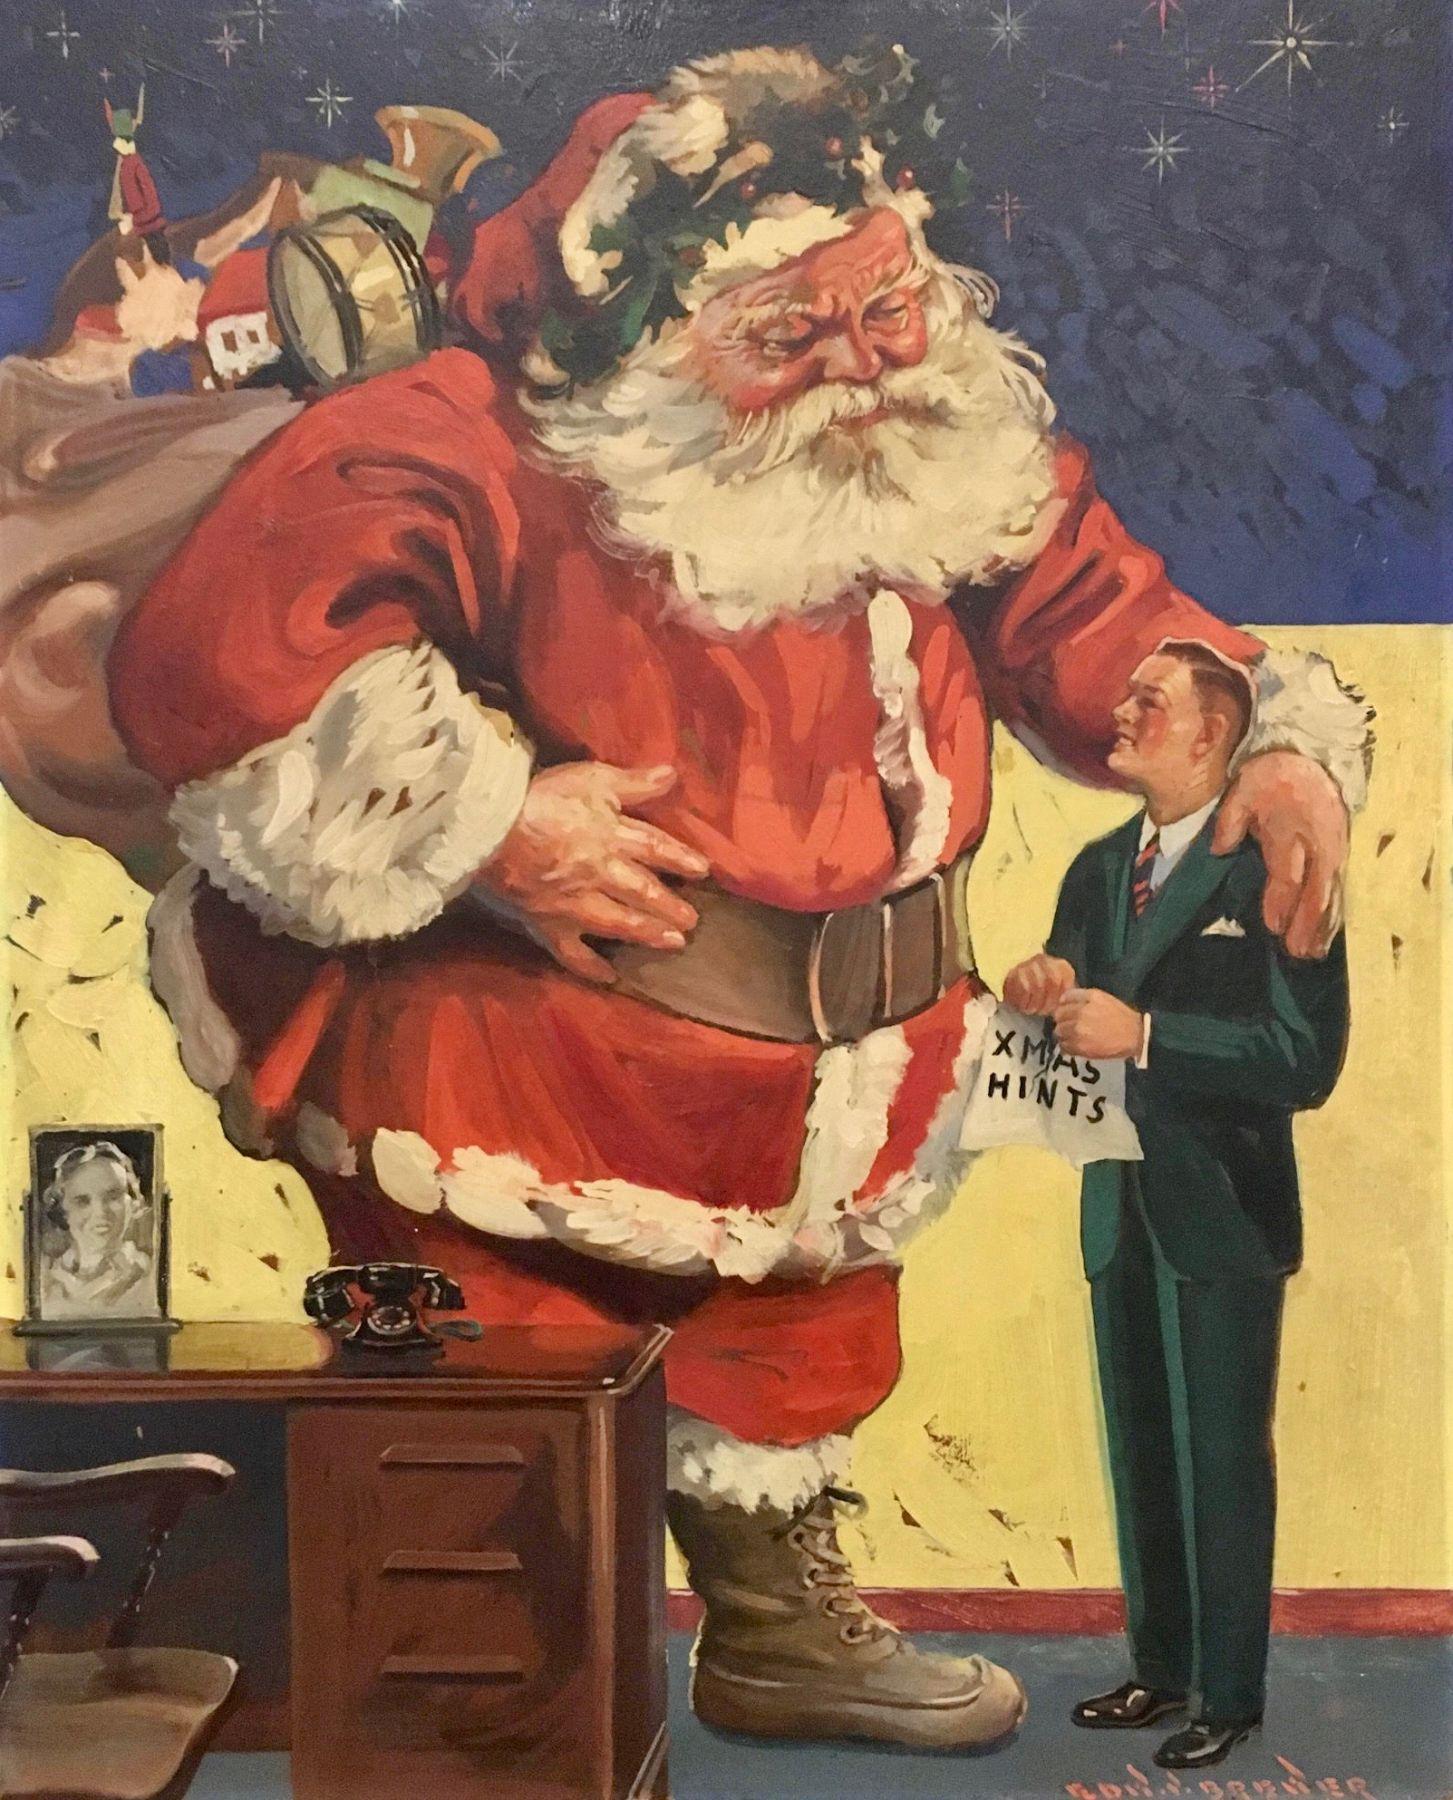 Edward Brewer Figurative Painting - Santa Claus, Likely Advertisement for Coolerator Refrigerators